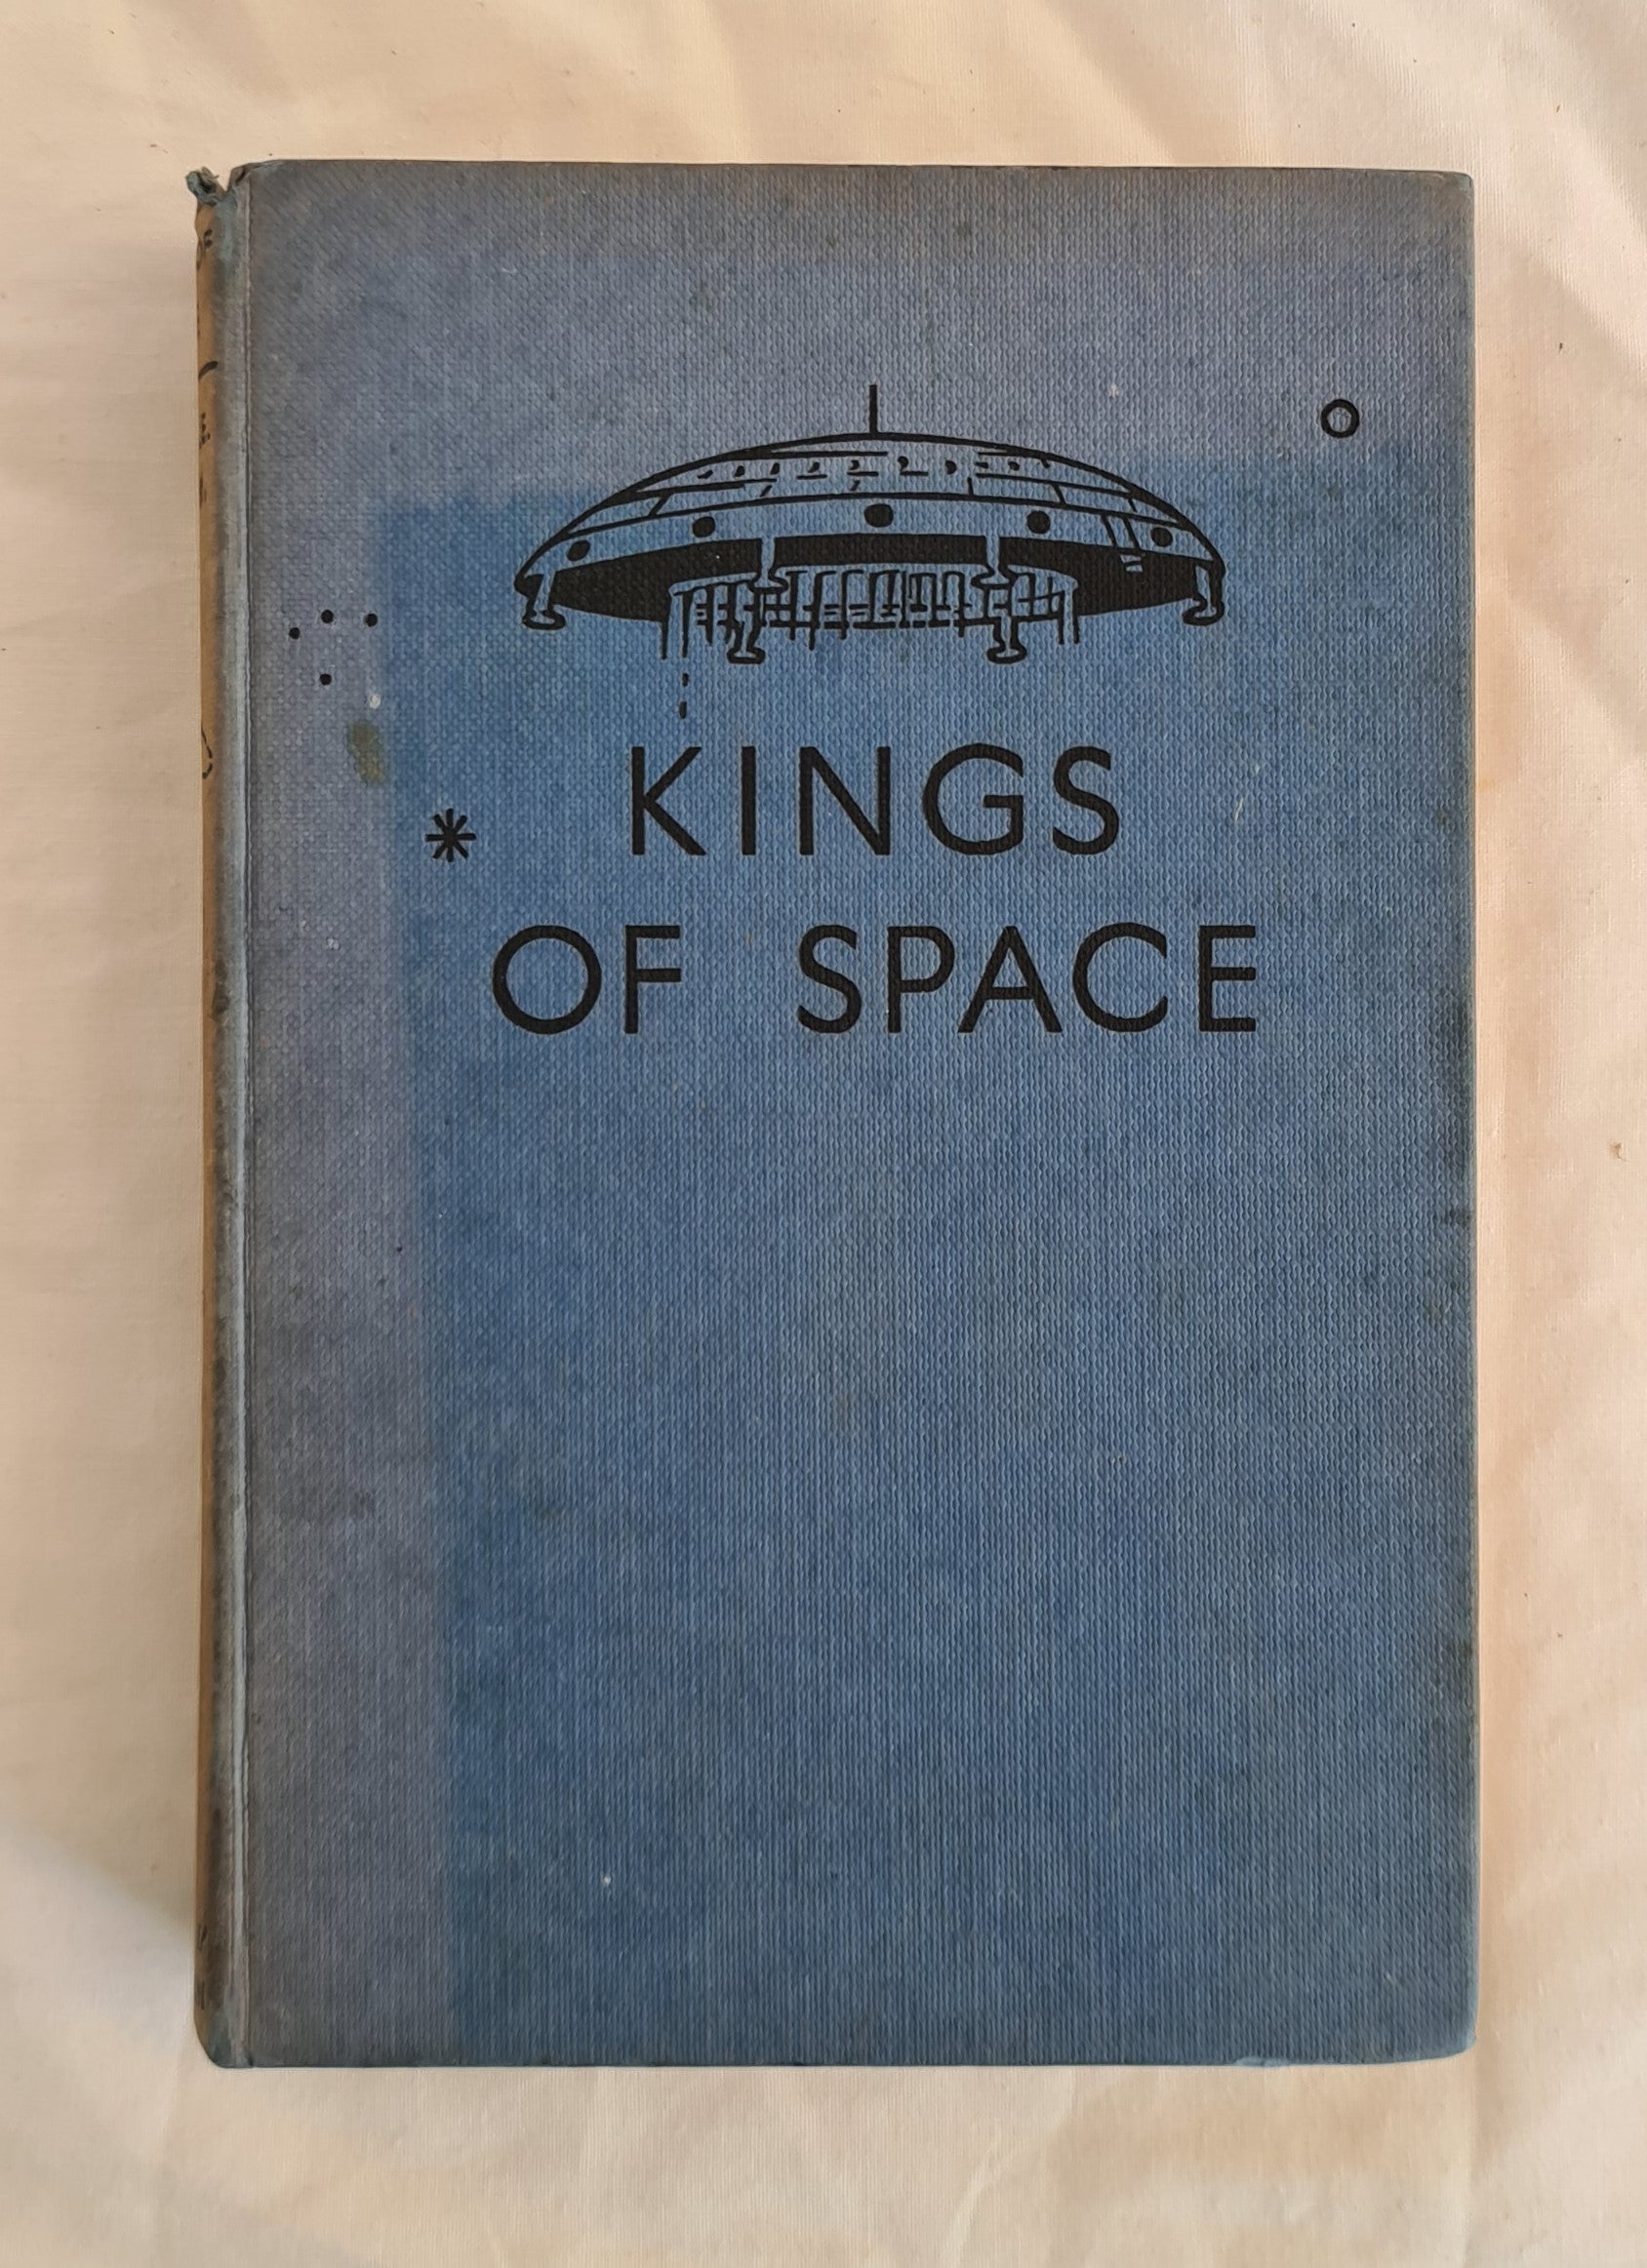 Kings of Space  A Story of Interplanetary Exploration  by Captain W. E. Johns  Illustrations by Stead